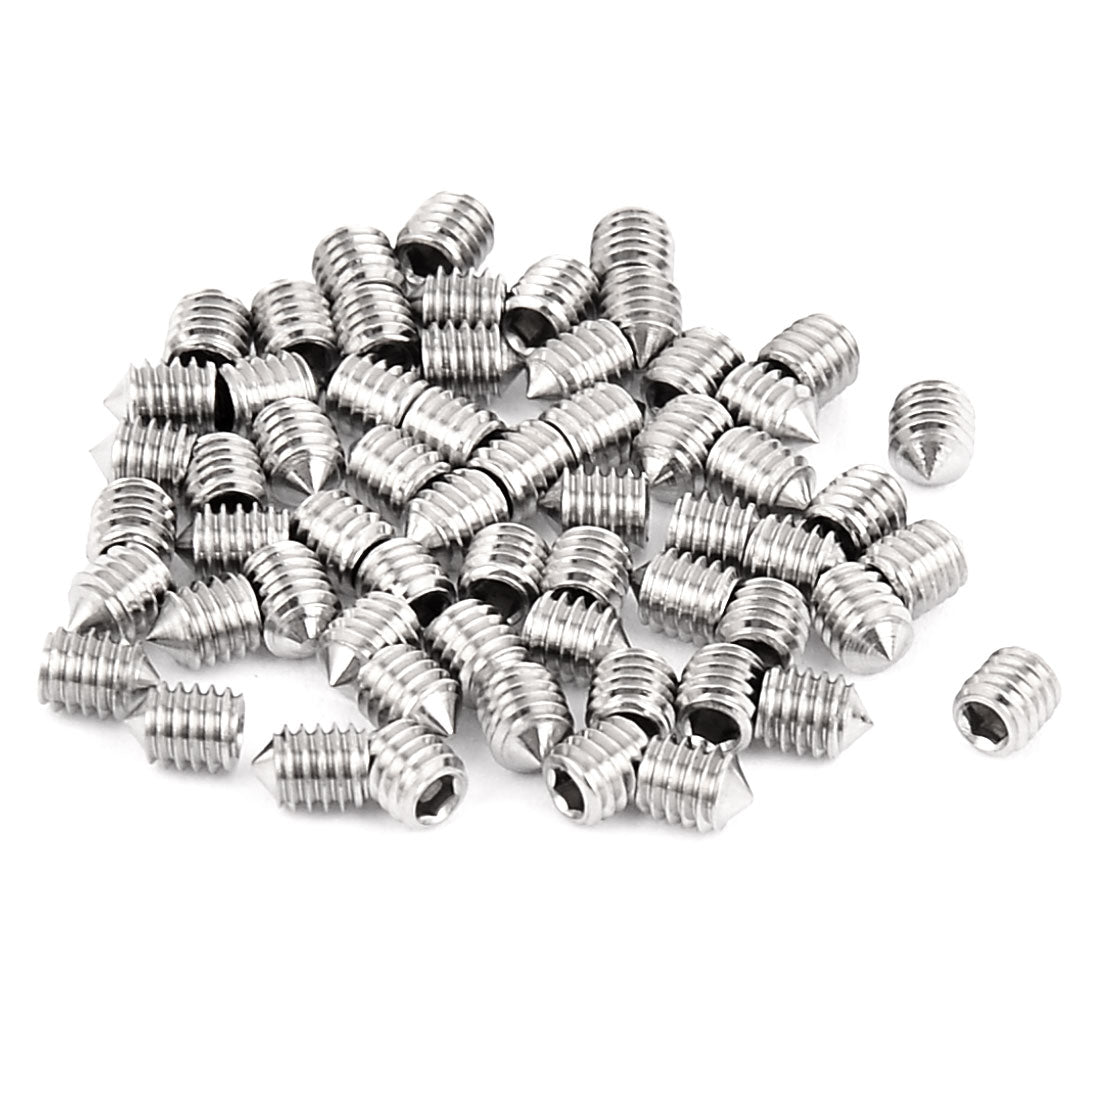 uxcell Uxcell 60pcs M4 x 5mm 304 Stainless Steel Hex Socket Cone Point Grub Screw